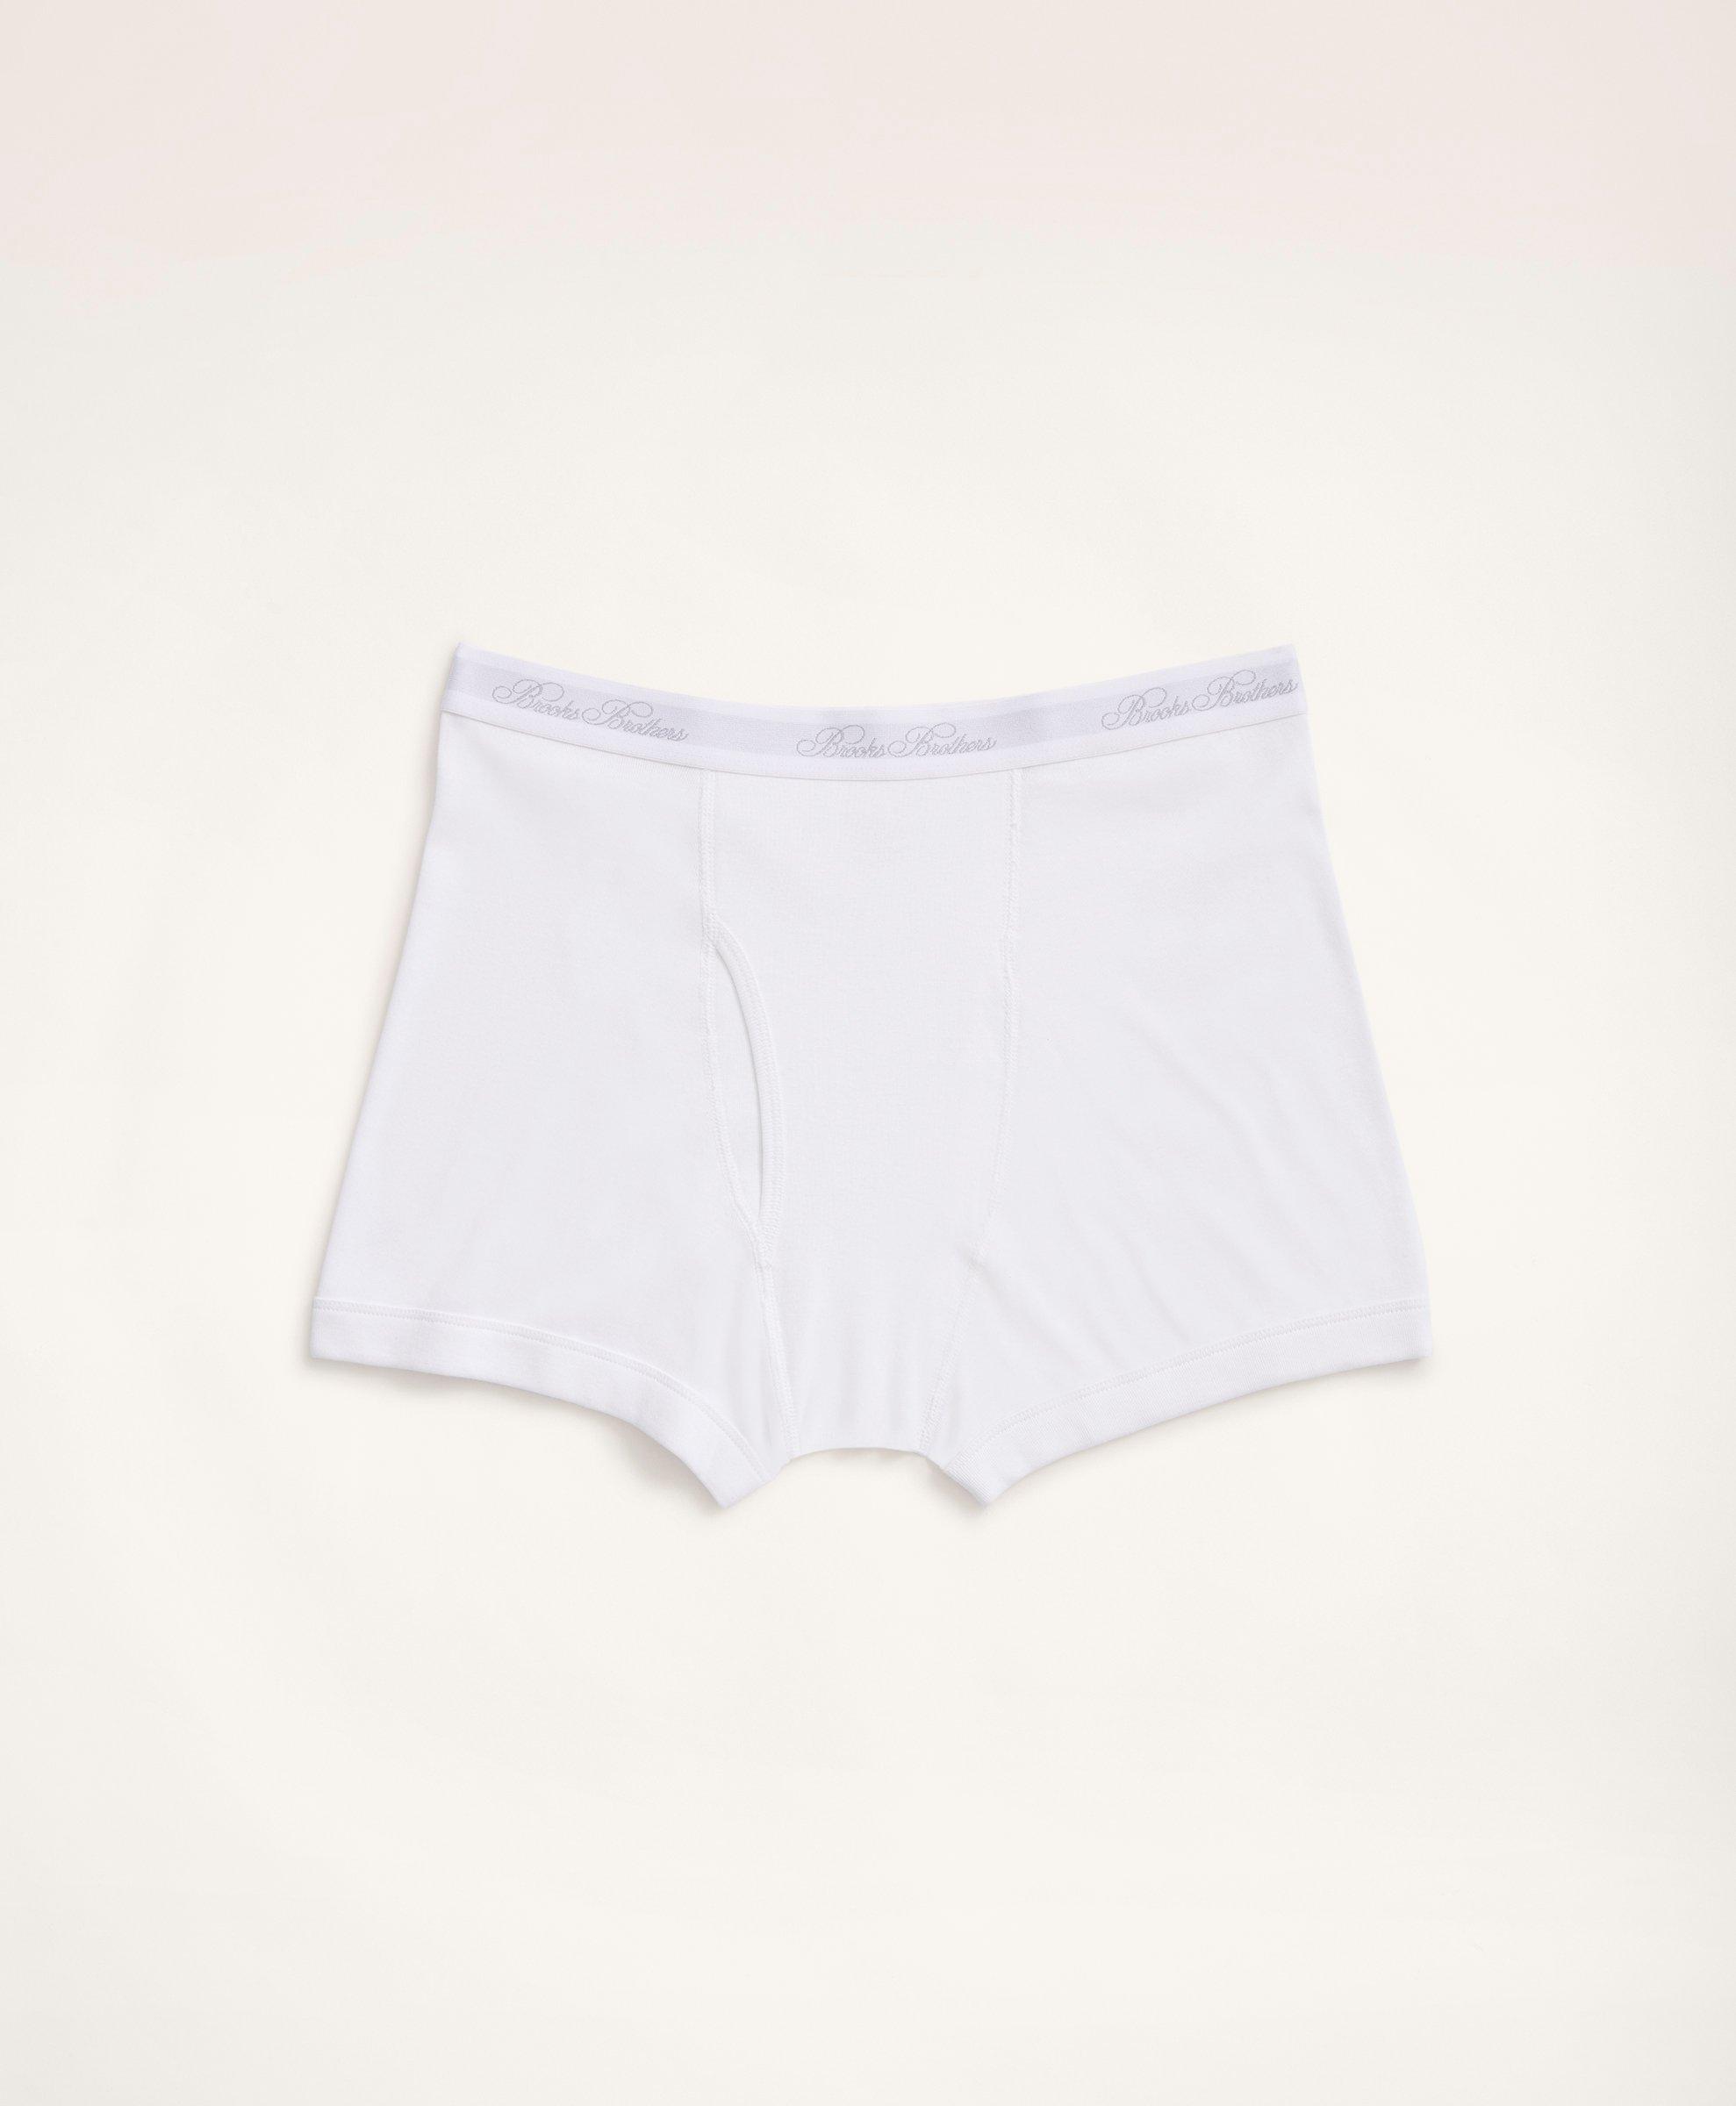 Brooks Brothers Supima Cotton Boxer Briefs - 3 Pack | White | Size 2xl